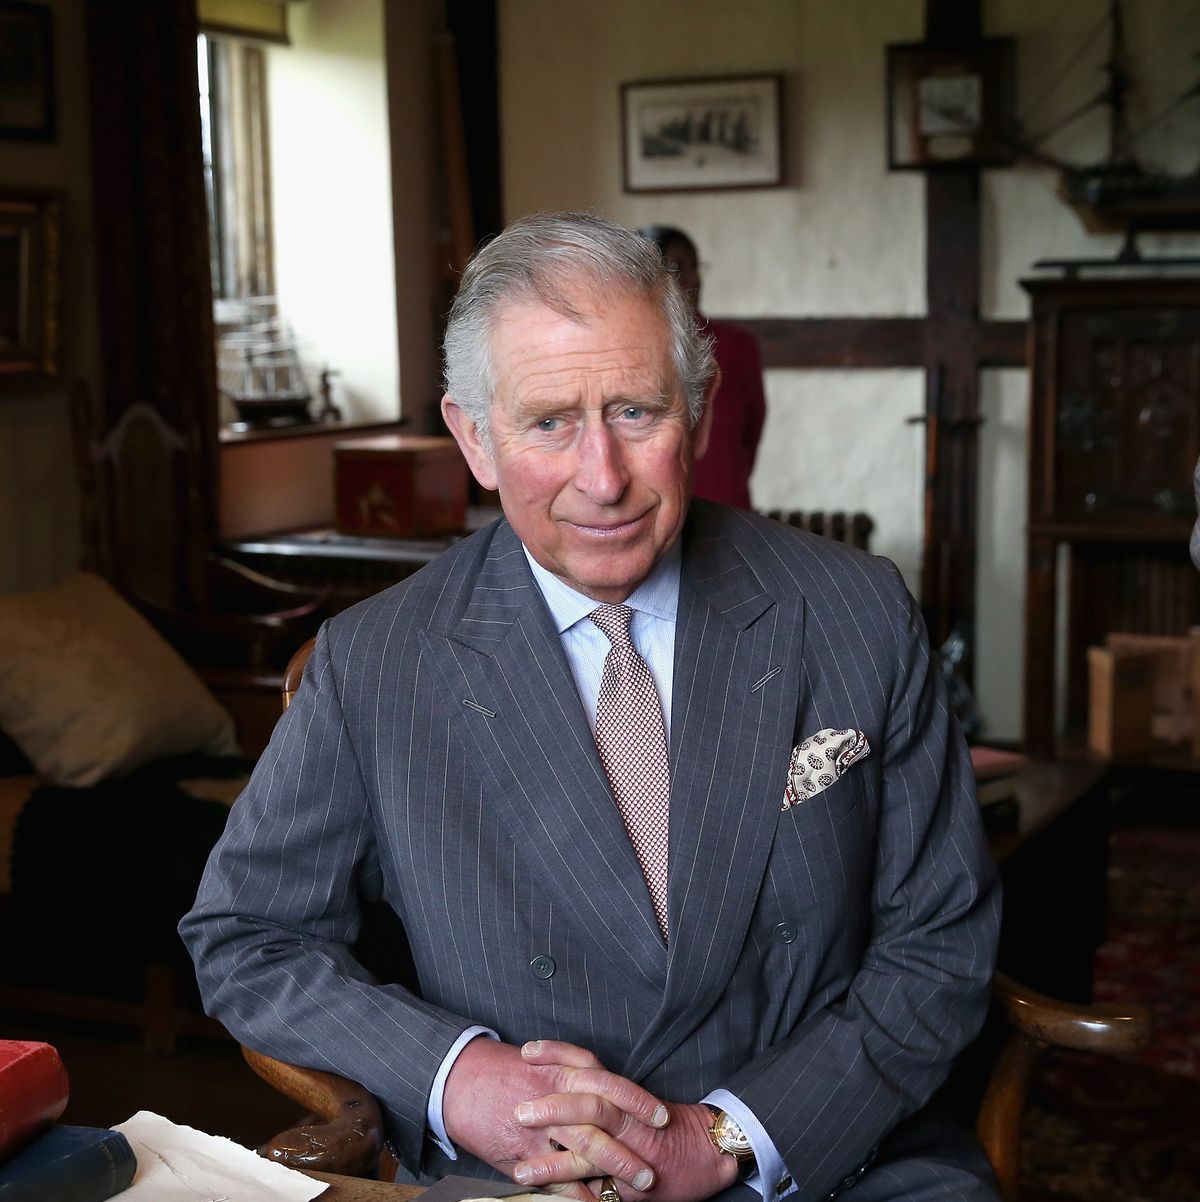 Prince Charles Continues Work in Quarantine After COVID-19 Diagnosis